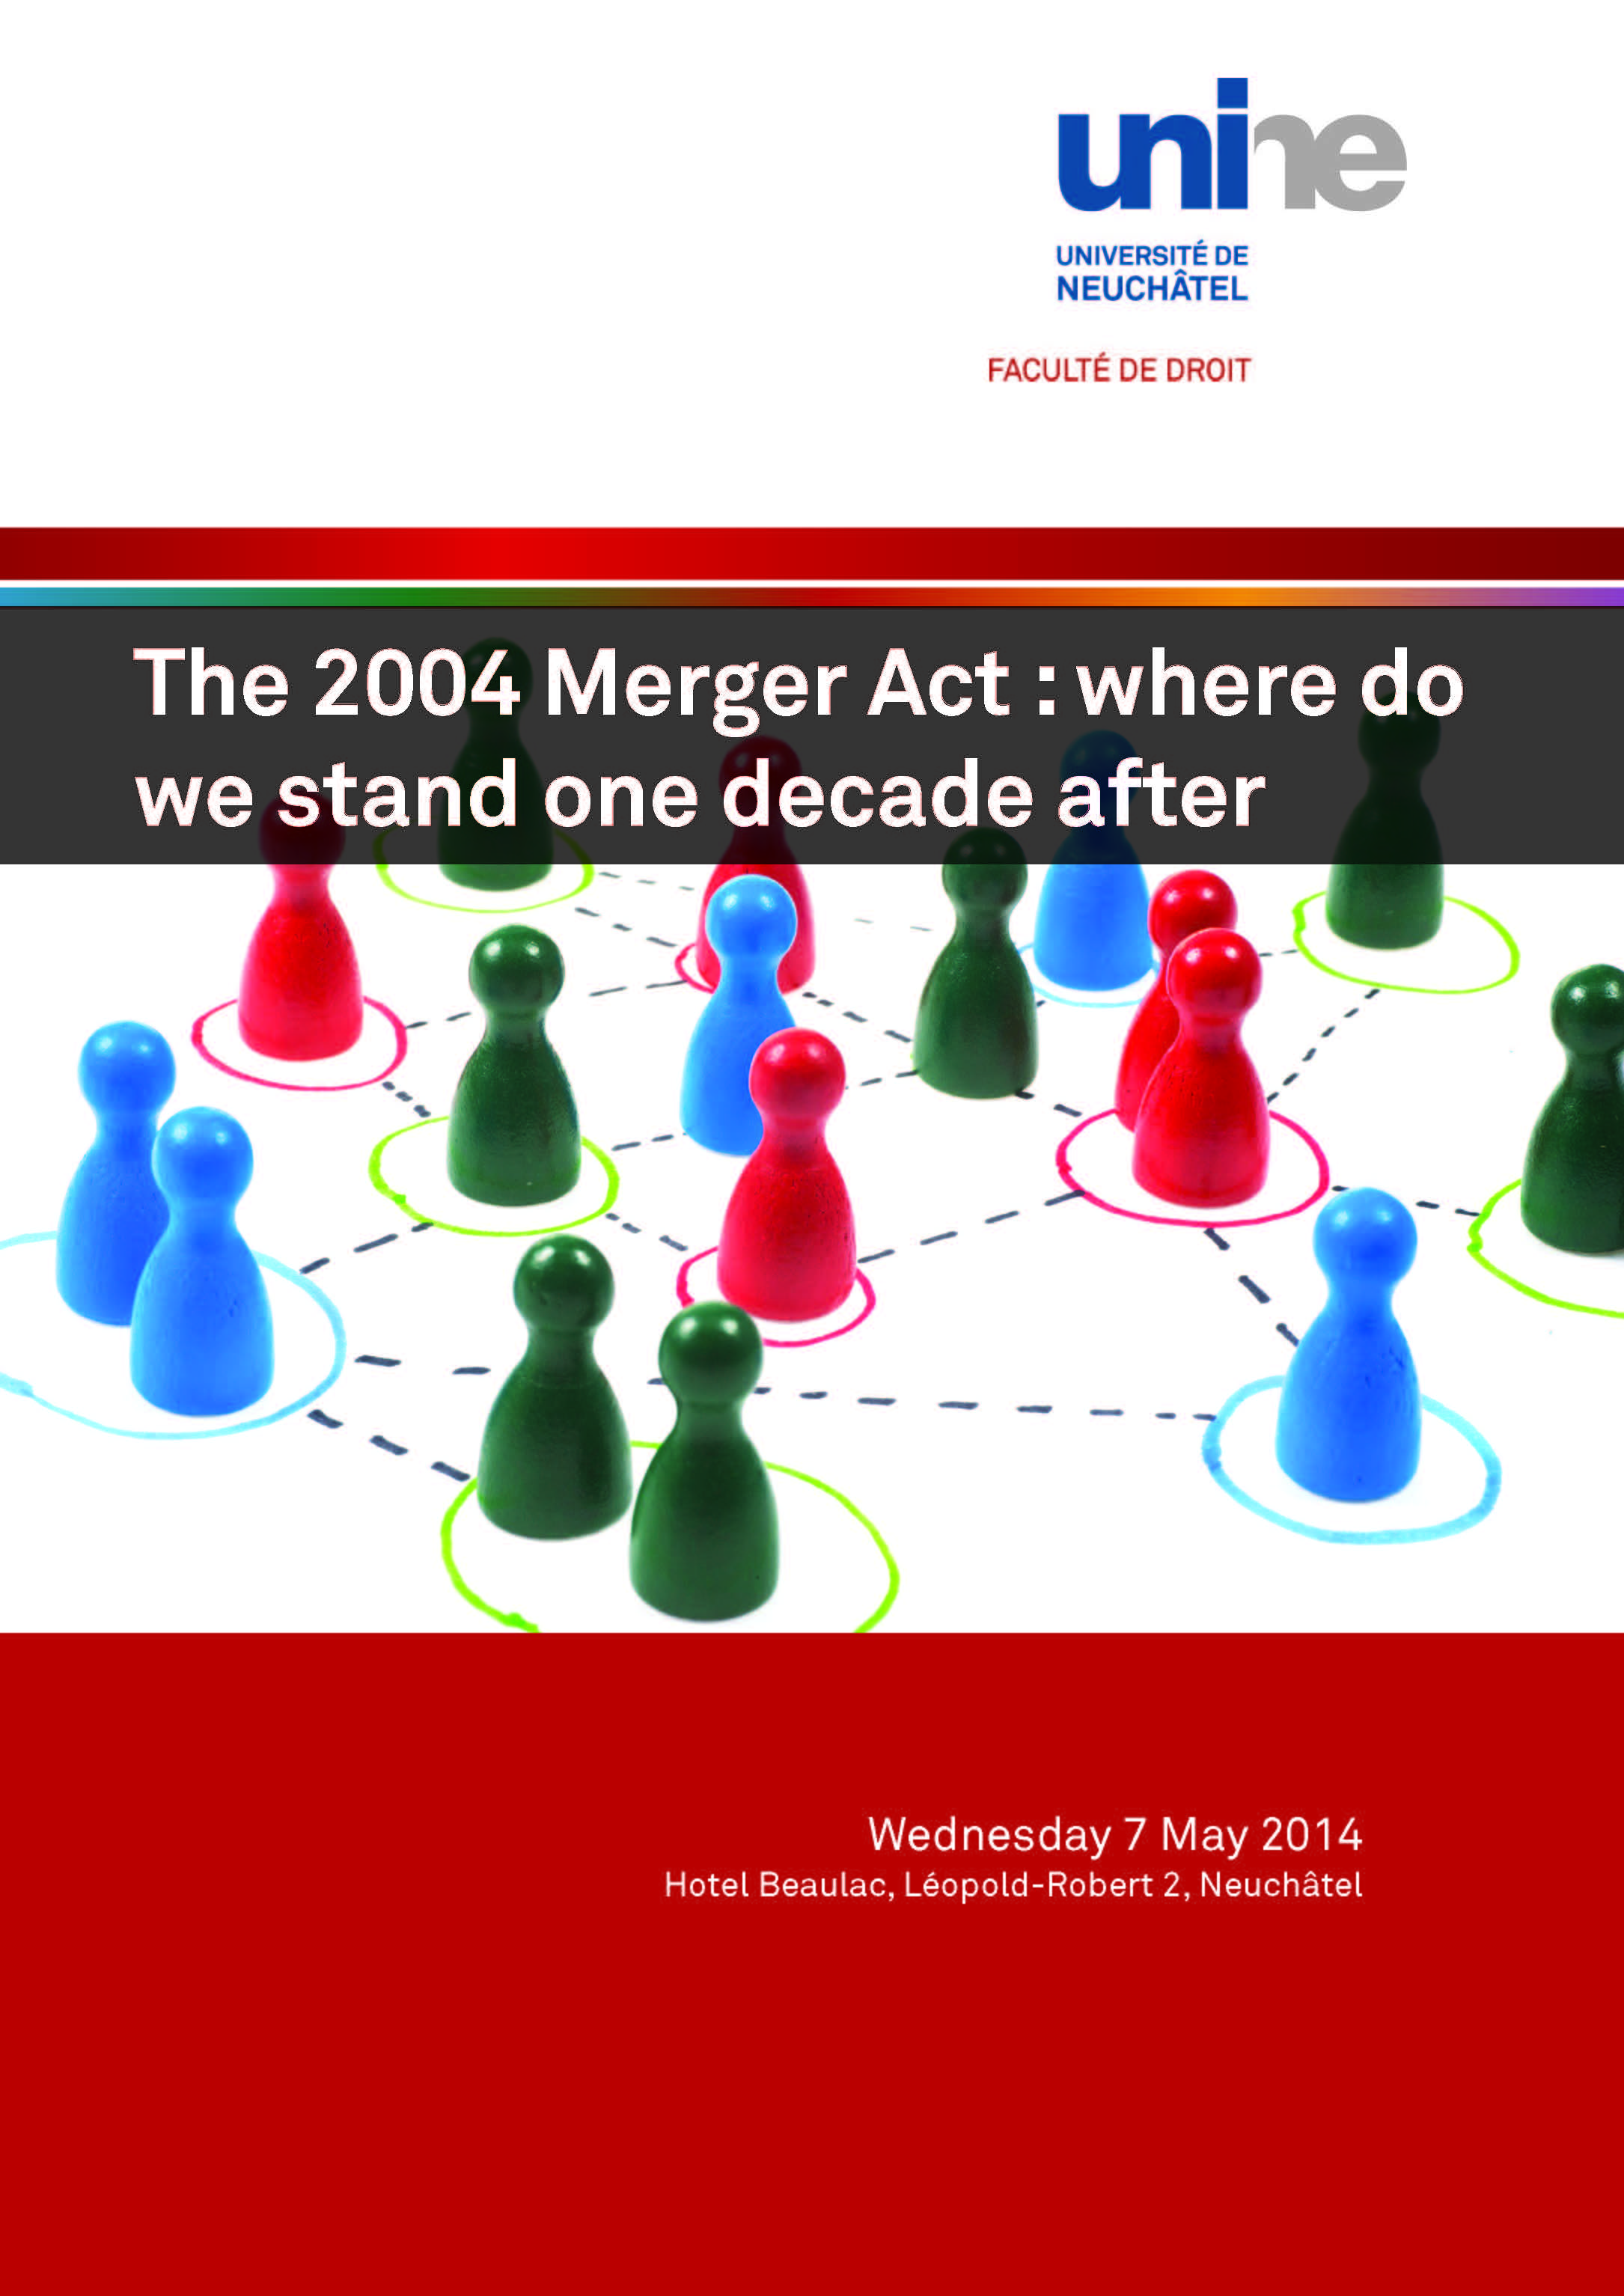 The 2004 Merger Act : where do we stand one decade after 